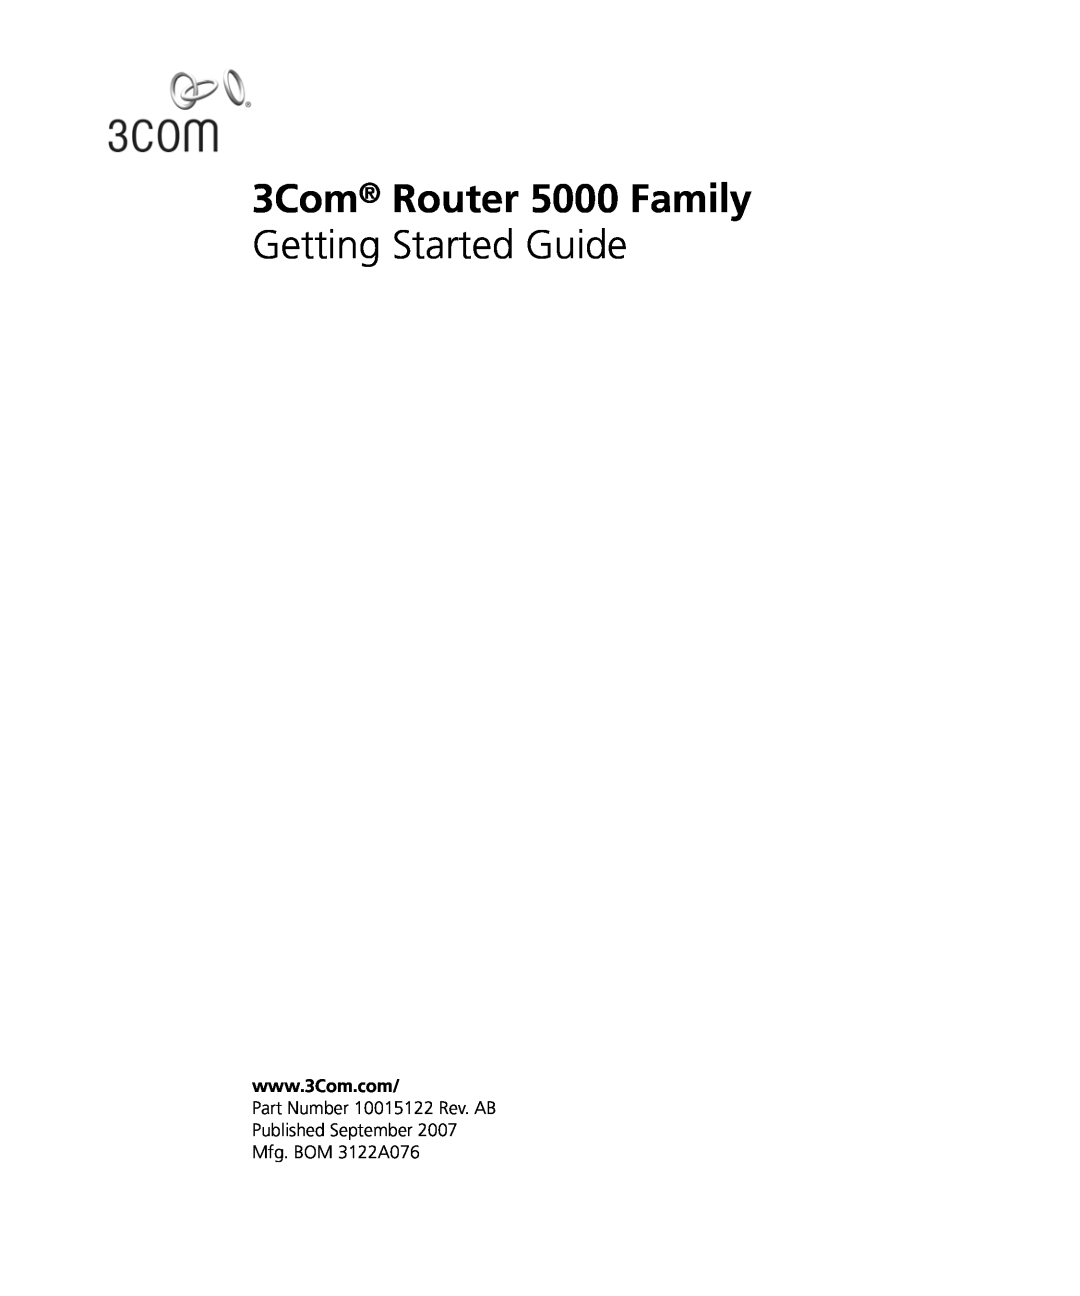 3Com manual 3Com Router 5000 Family, Getting Started Guide 